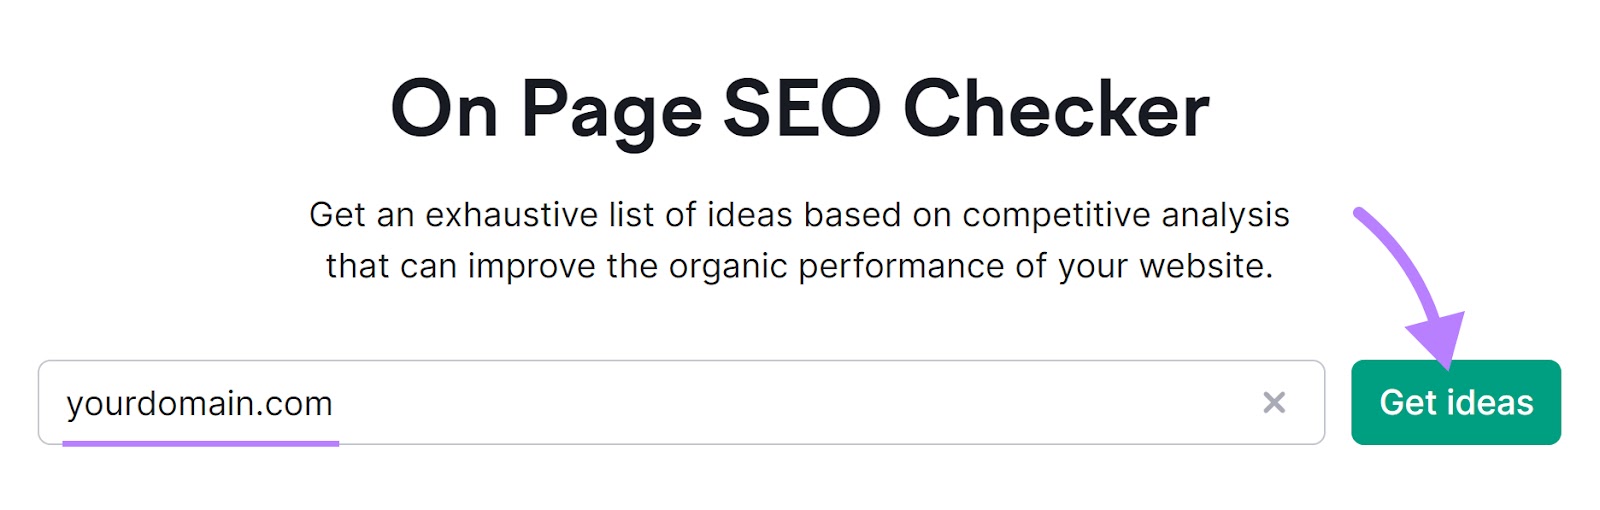 On-Page SEO Checker "Get ideas" button